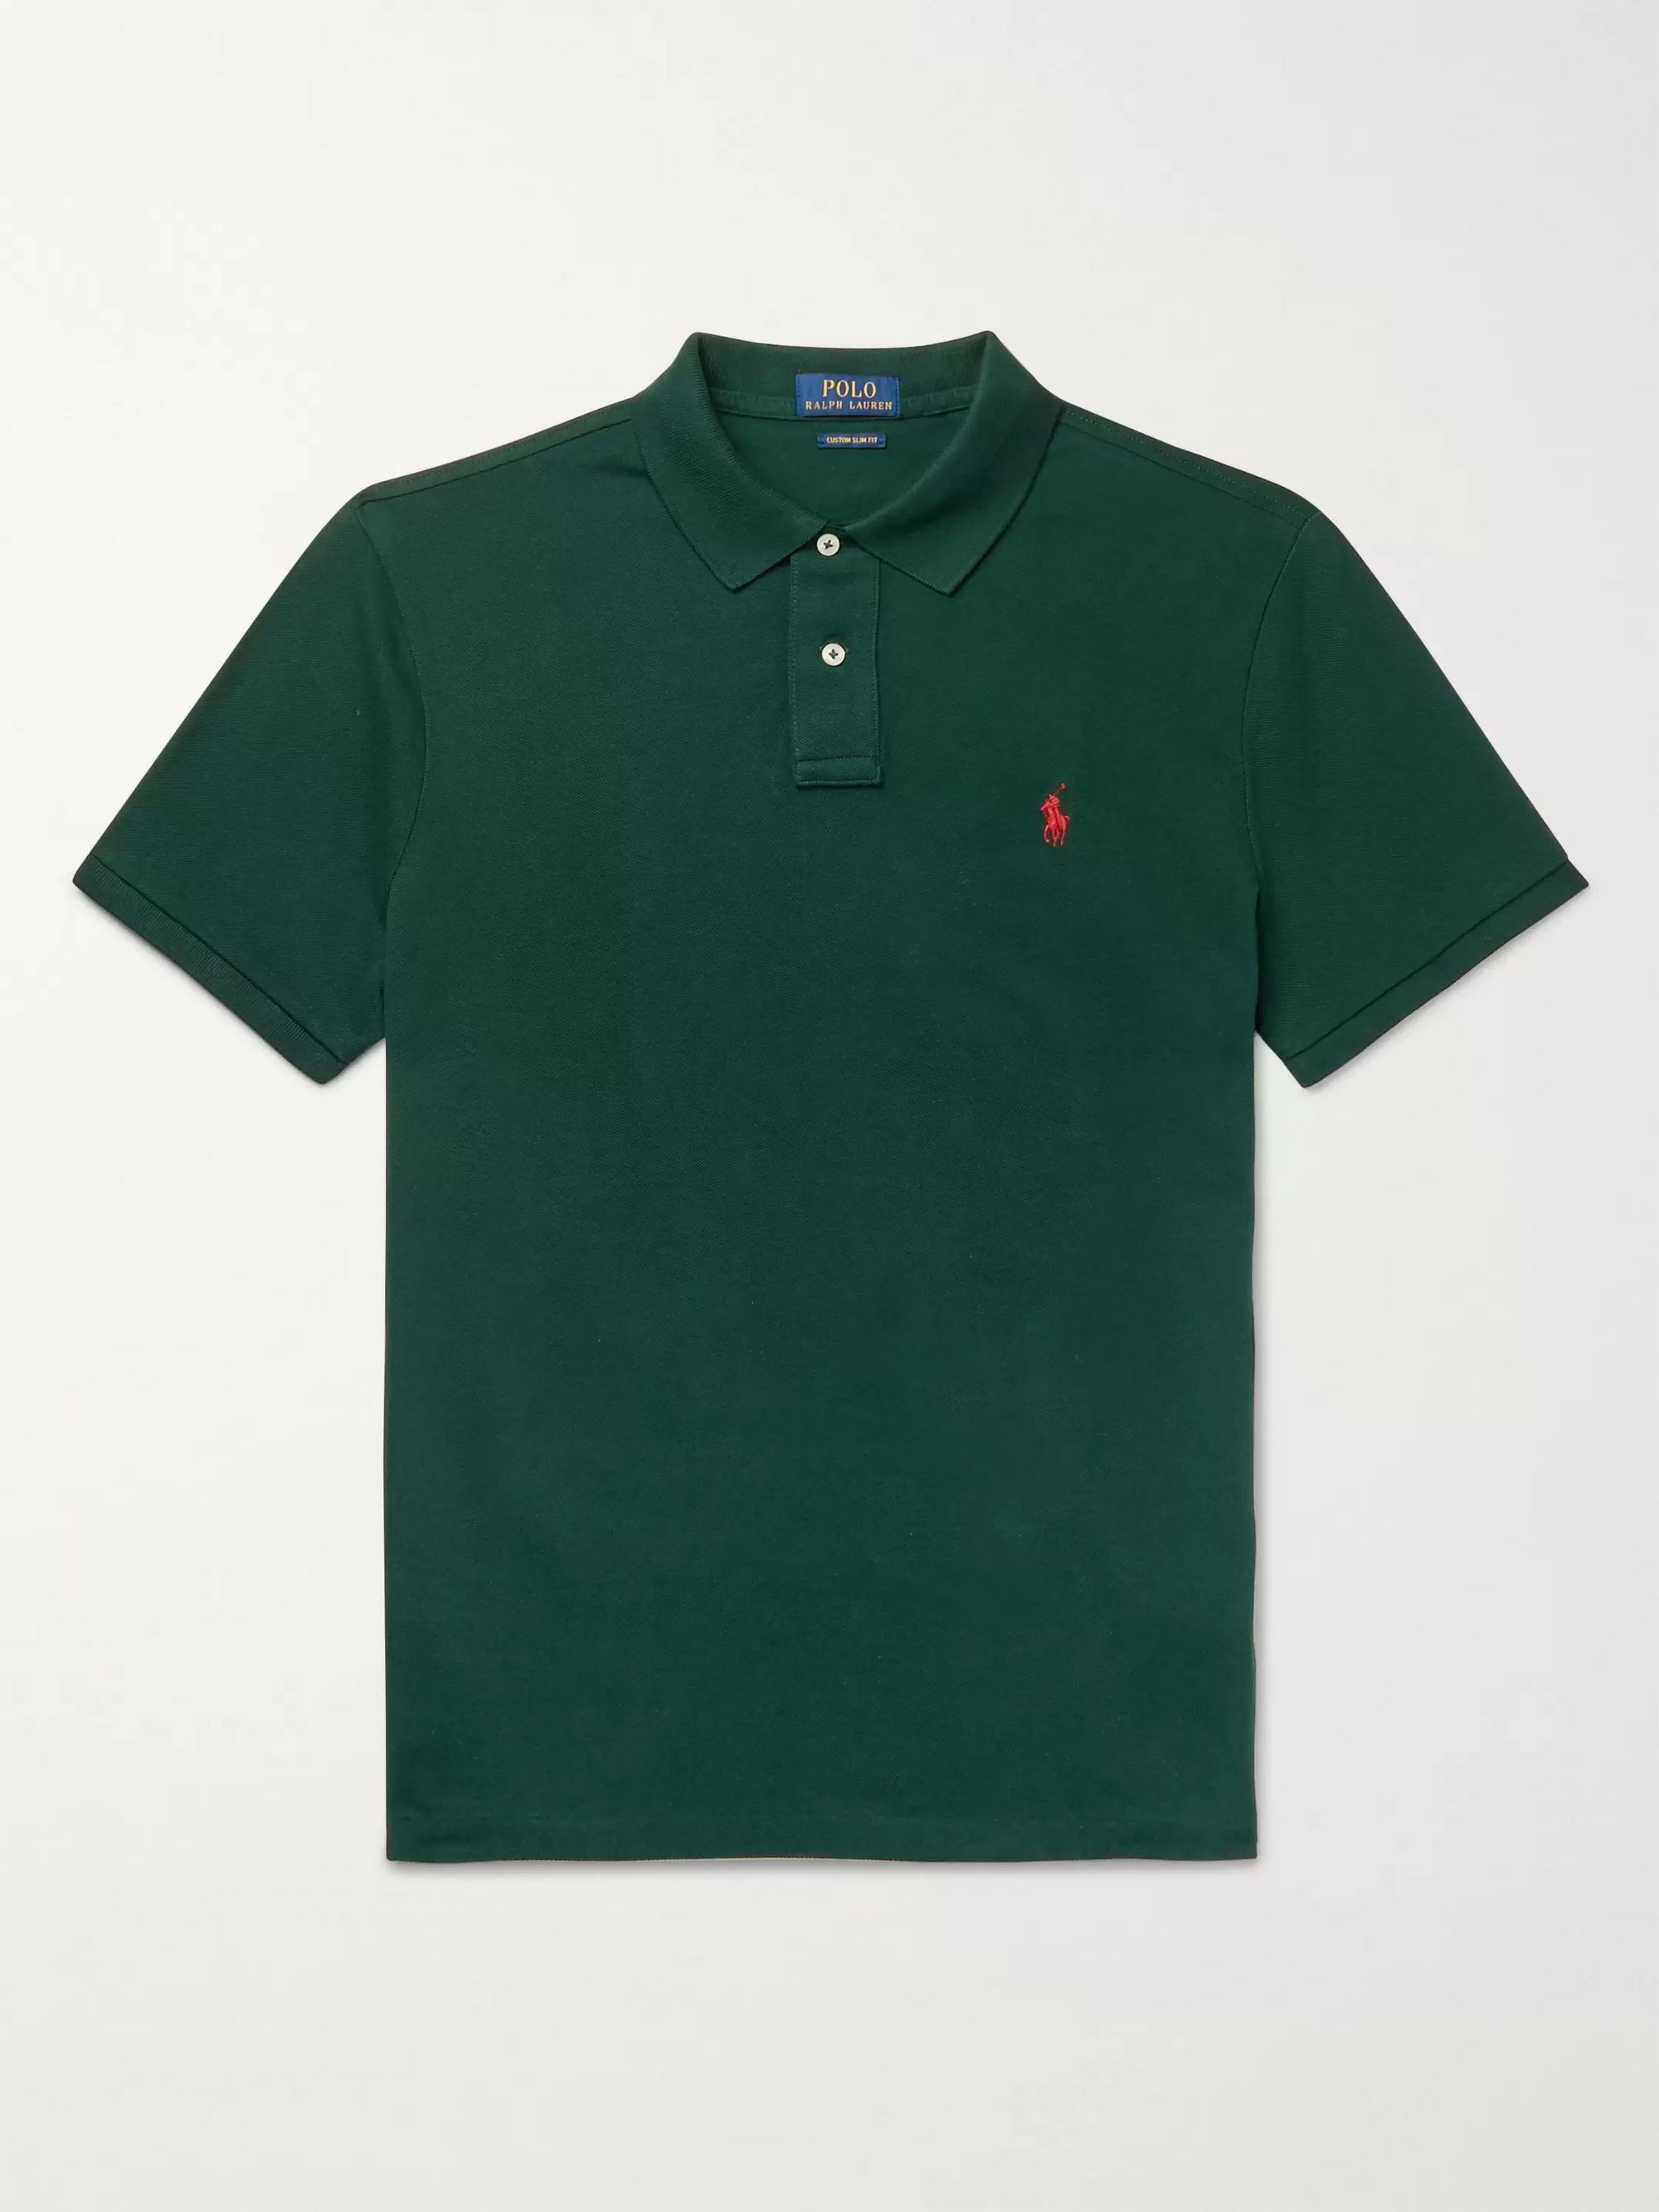 embroidered ralph lauren polo shirts